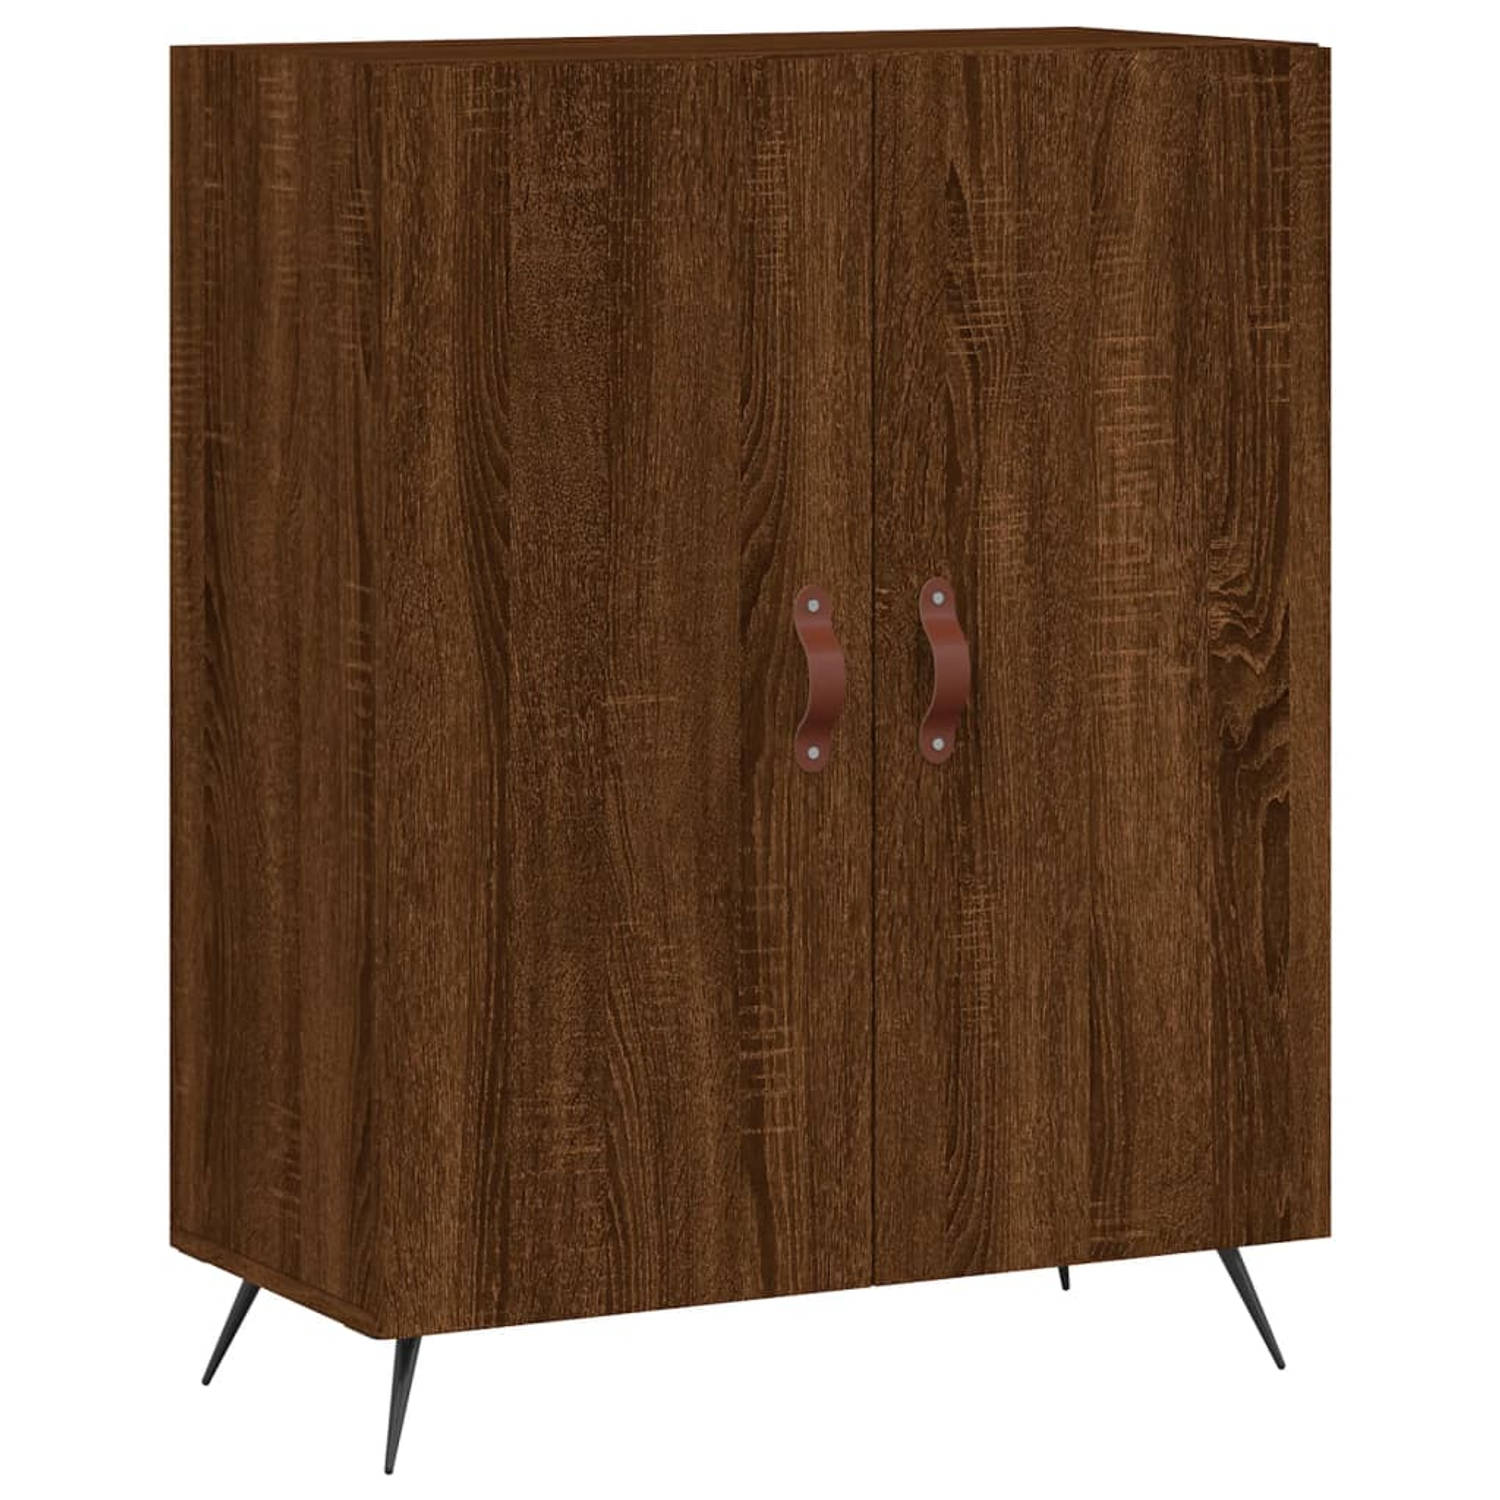 The Living Store Dressoir Classic Brown - 69.5 x 34 x 90 cm - Durable wood and metal